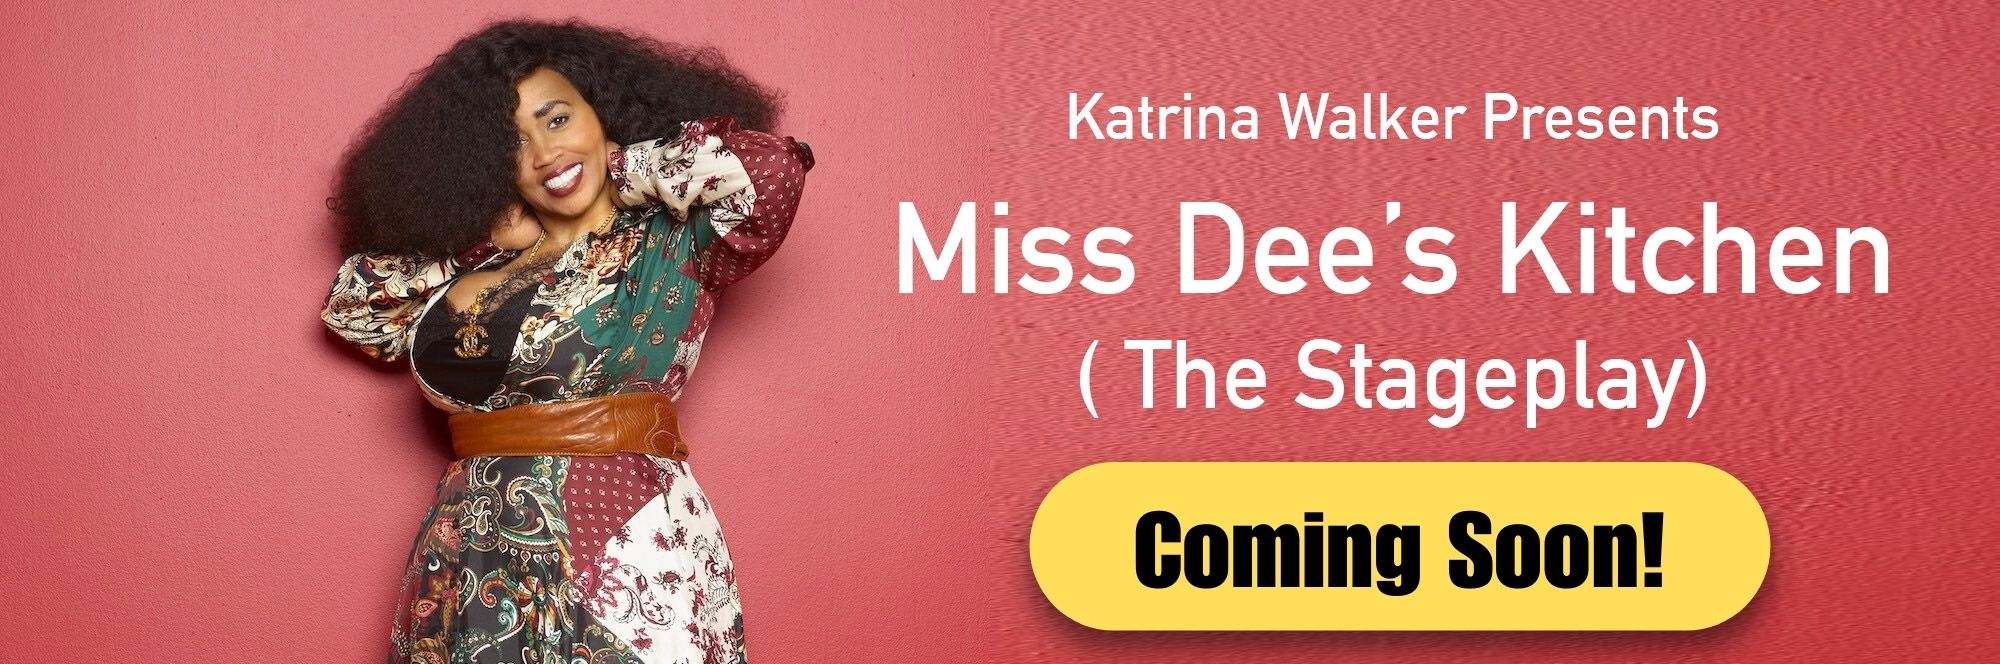 Miss Dee's Kitchen, the stage play